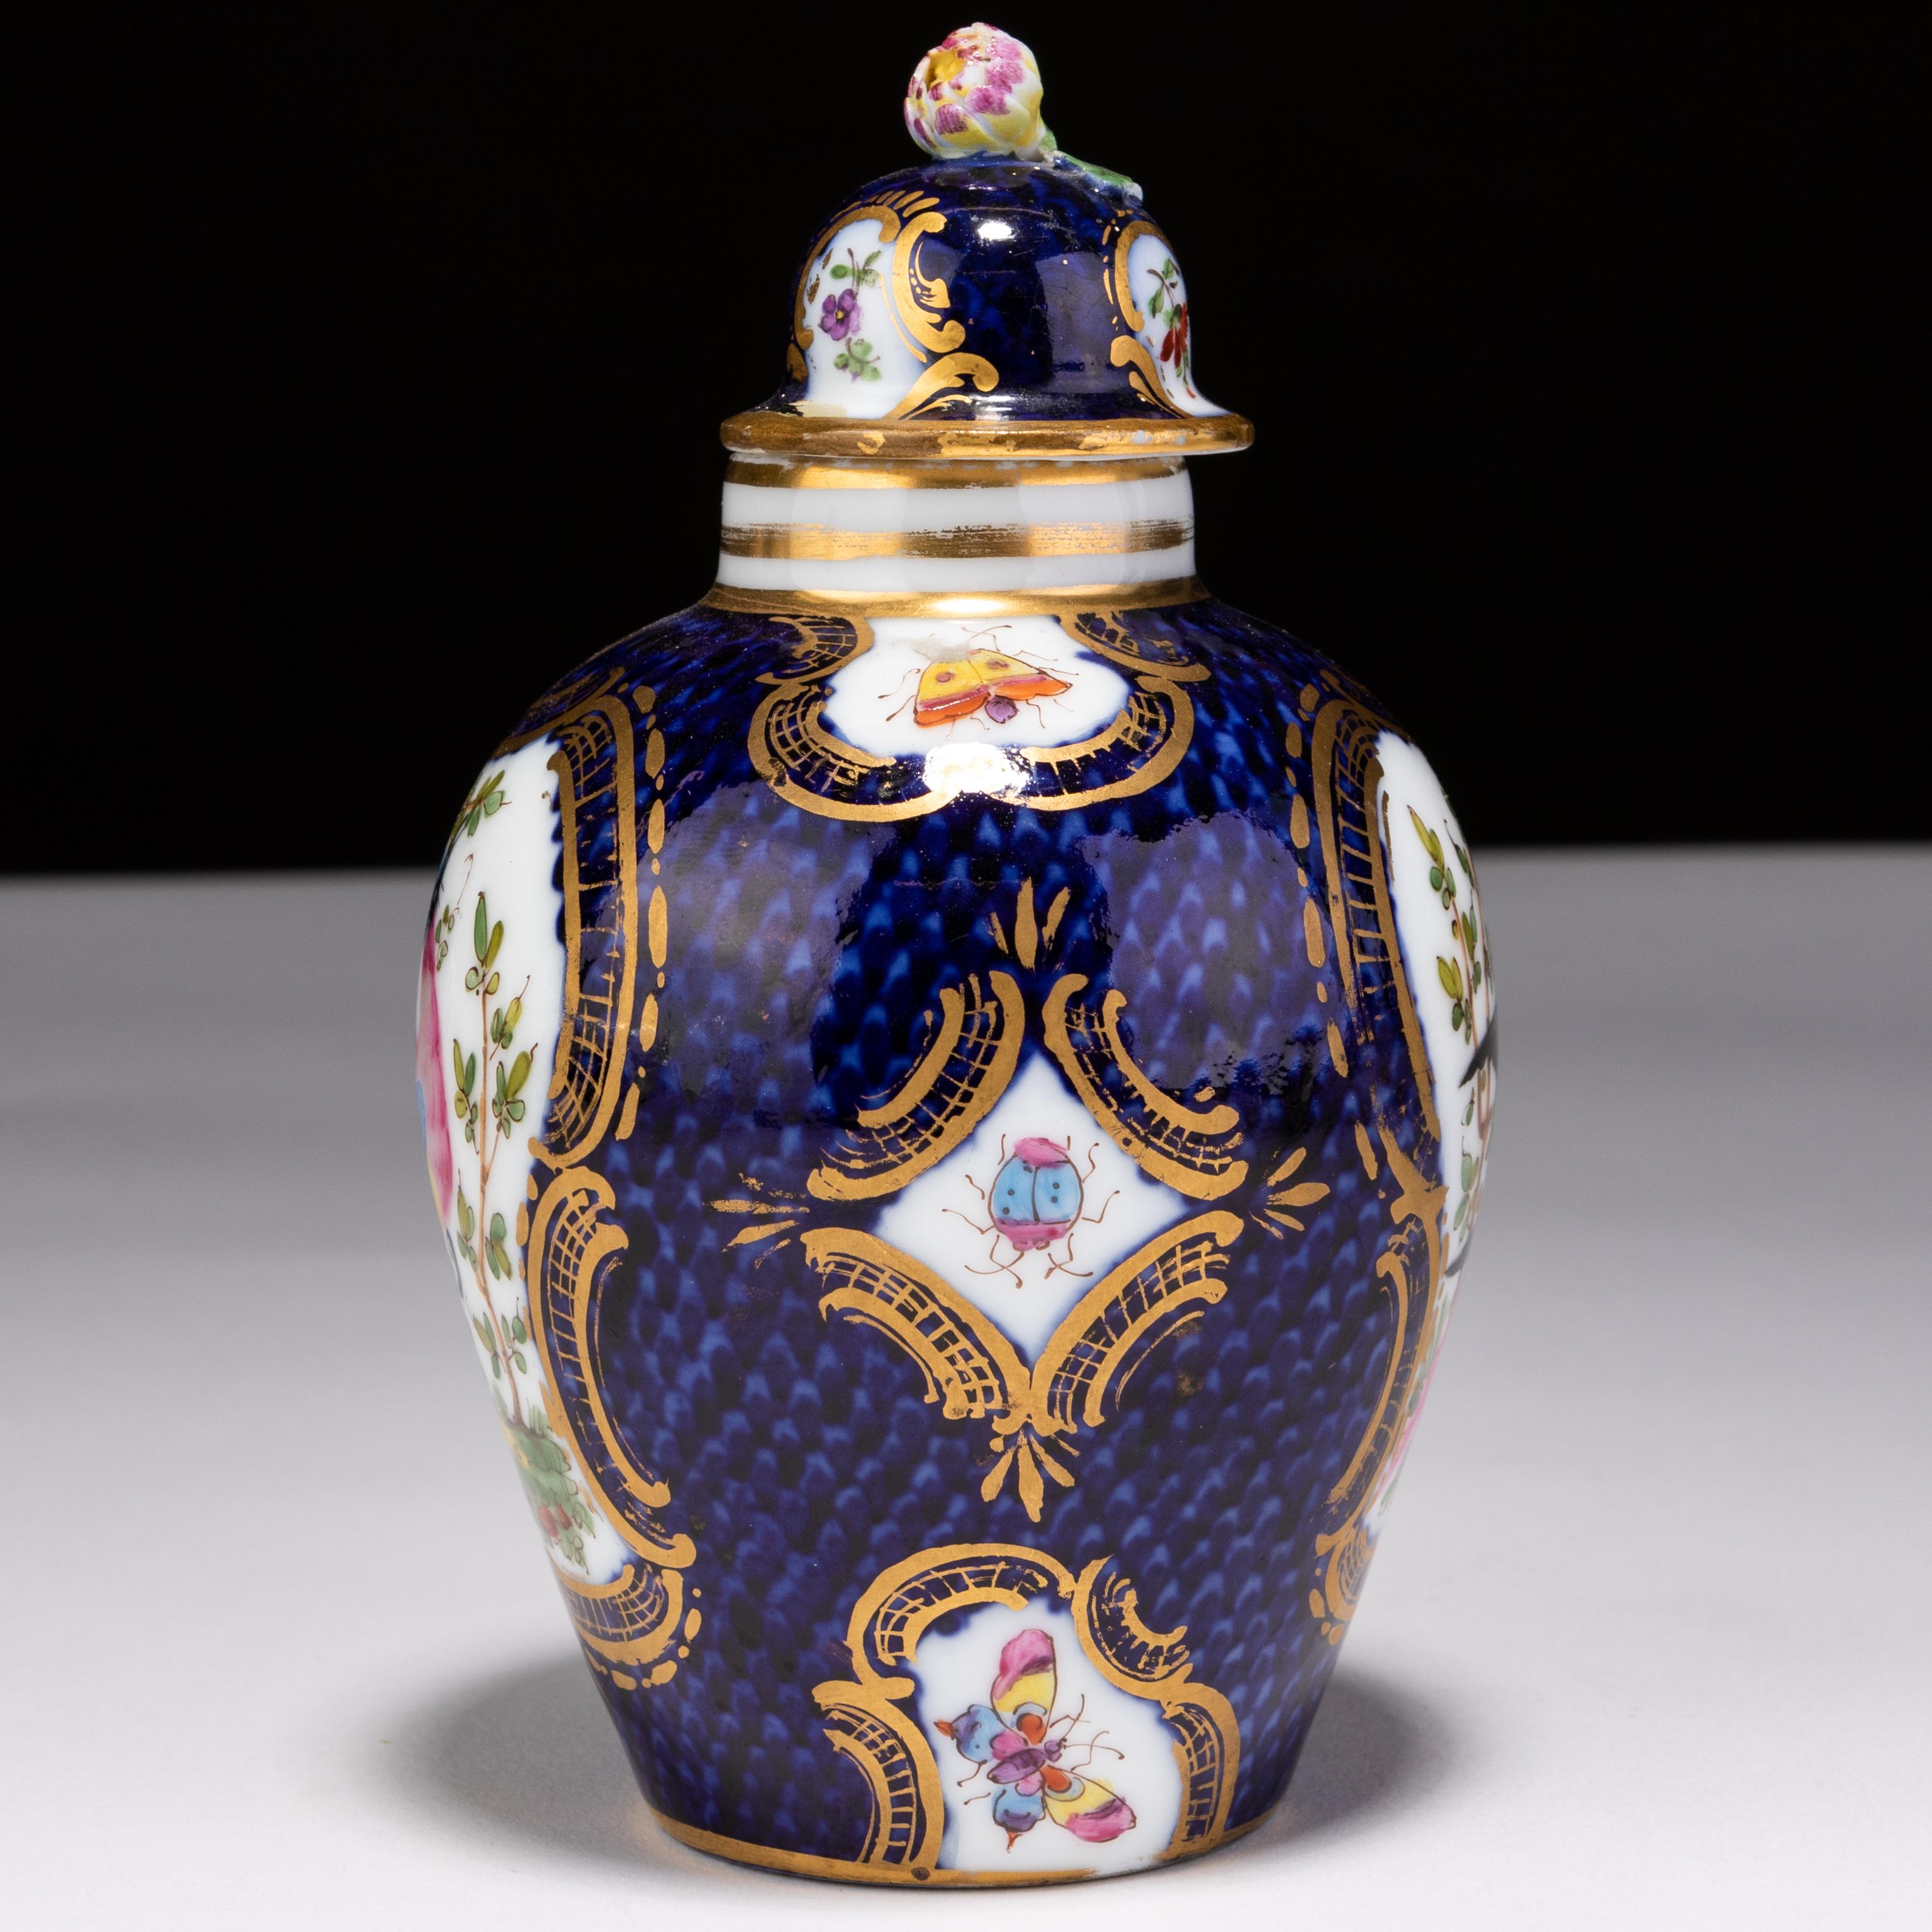 Booths Asiatic Pheasant Cobalt English Porcelain Lidded Vase 19th Century 
Very good condition
From a private collection
Free international shipping